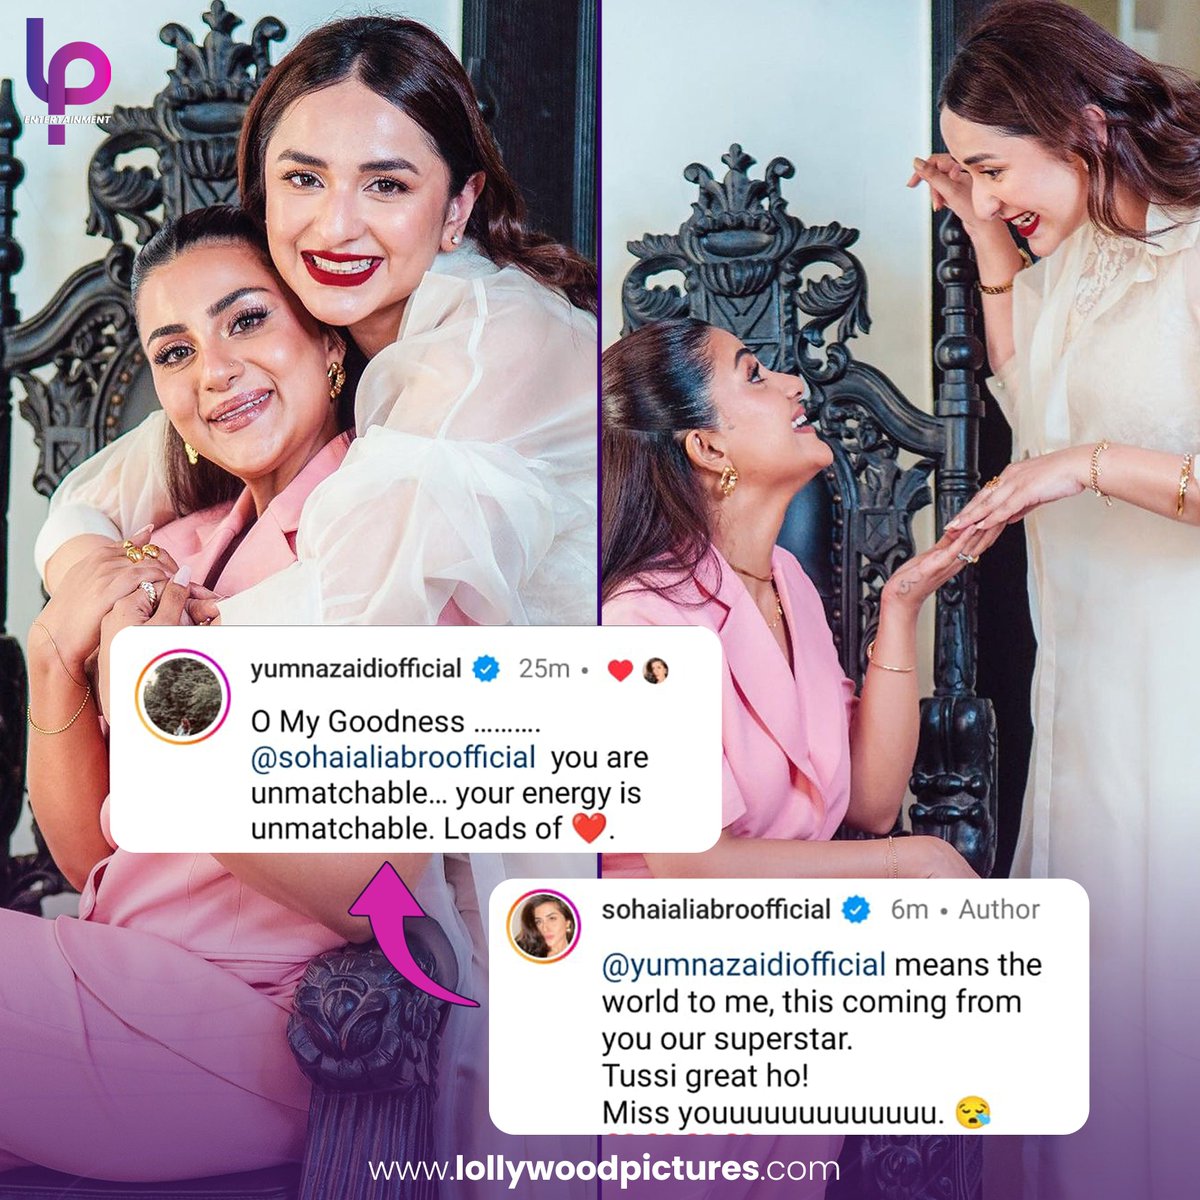 Gentleman girls! 🔥❤️ When two besties come together and never shy of appreciating each other. #YumnaZaidi #SohailAliAbro #Gentleman #Celebrities #LPEntertainment